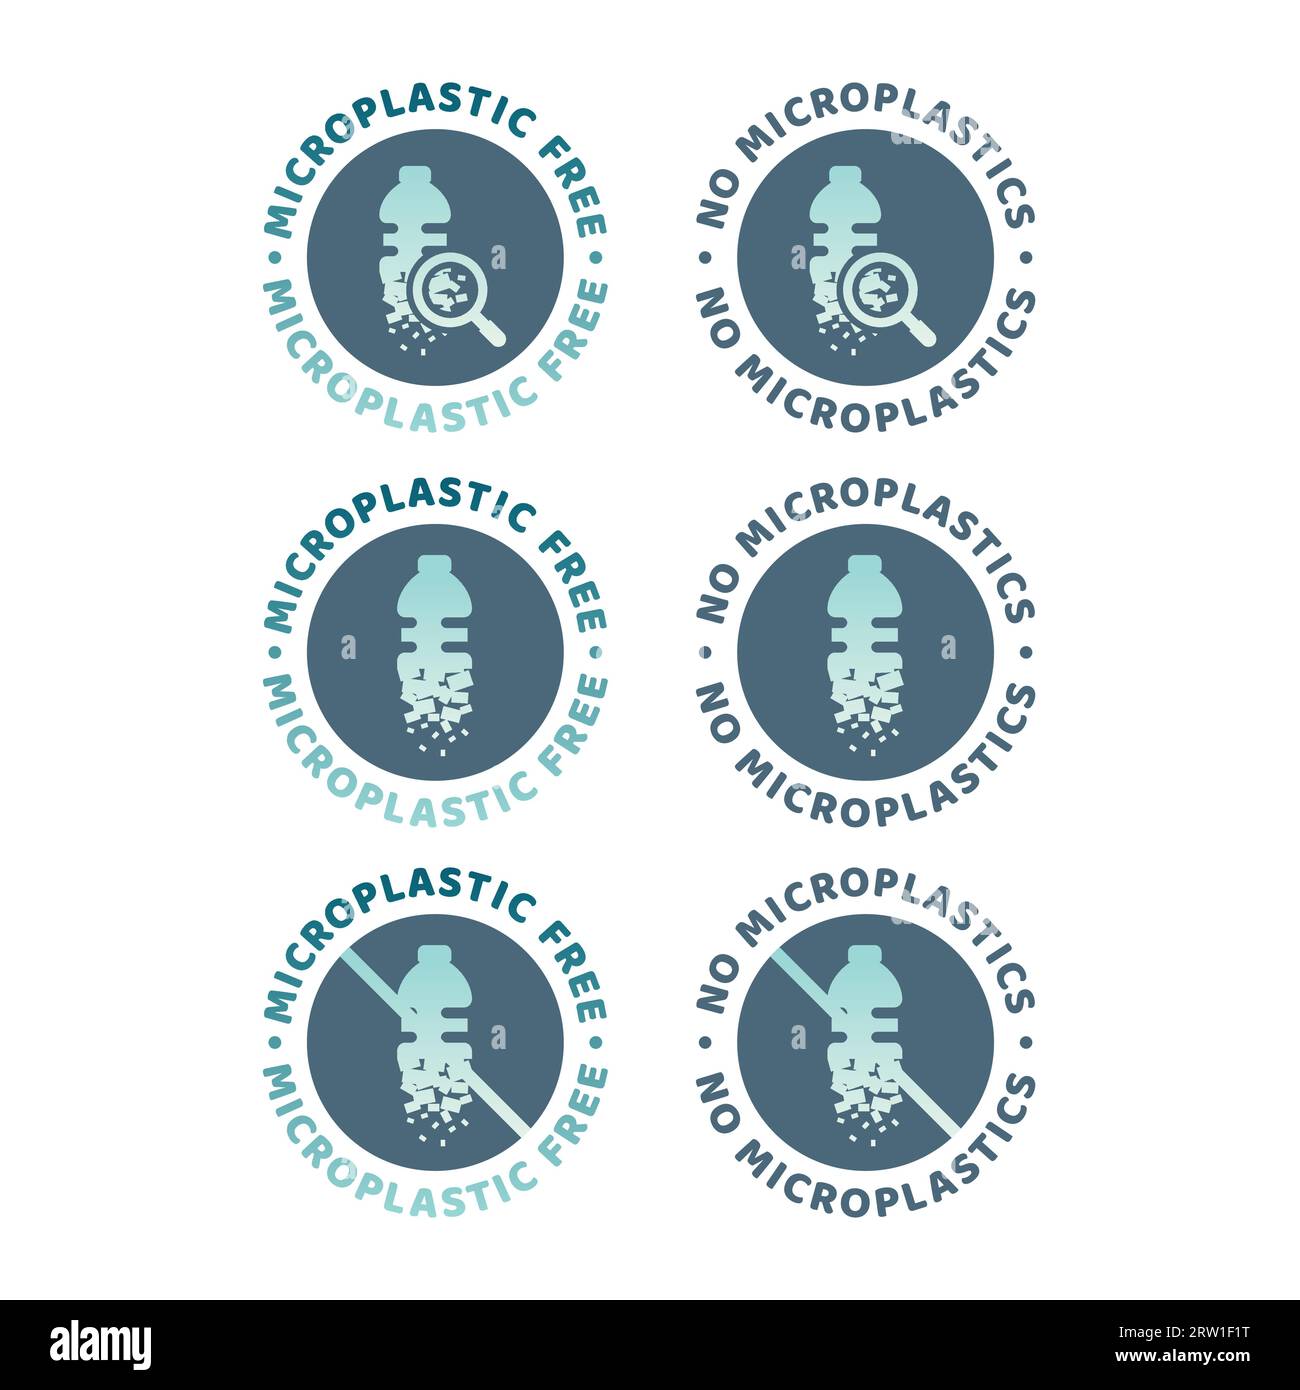 Microplastic free colorful vector label set. No microplastics emblem icon. Stock Vector